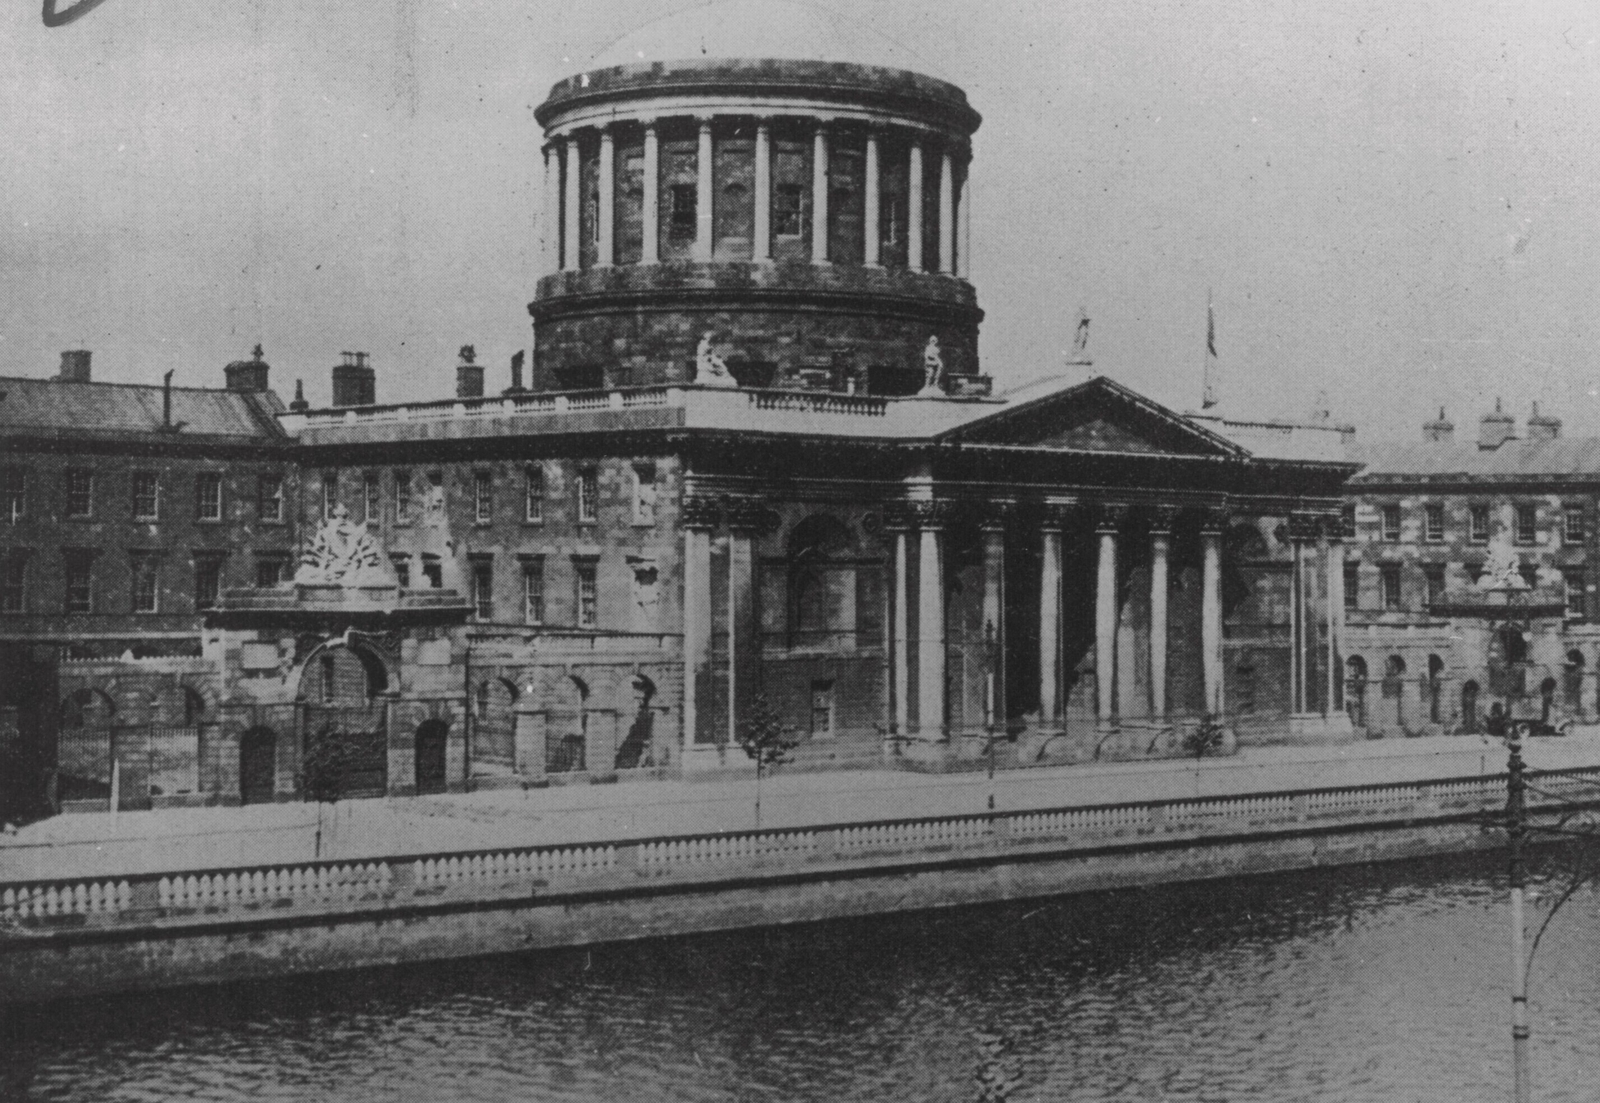 Image - The Four Courts complex in Dublin, as it would have appeared before the IRA occupation in April. Image: RTÉ Photographic Archive, The Cashman Collection